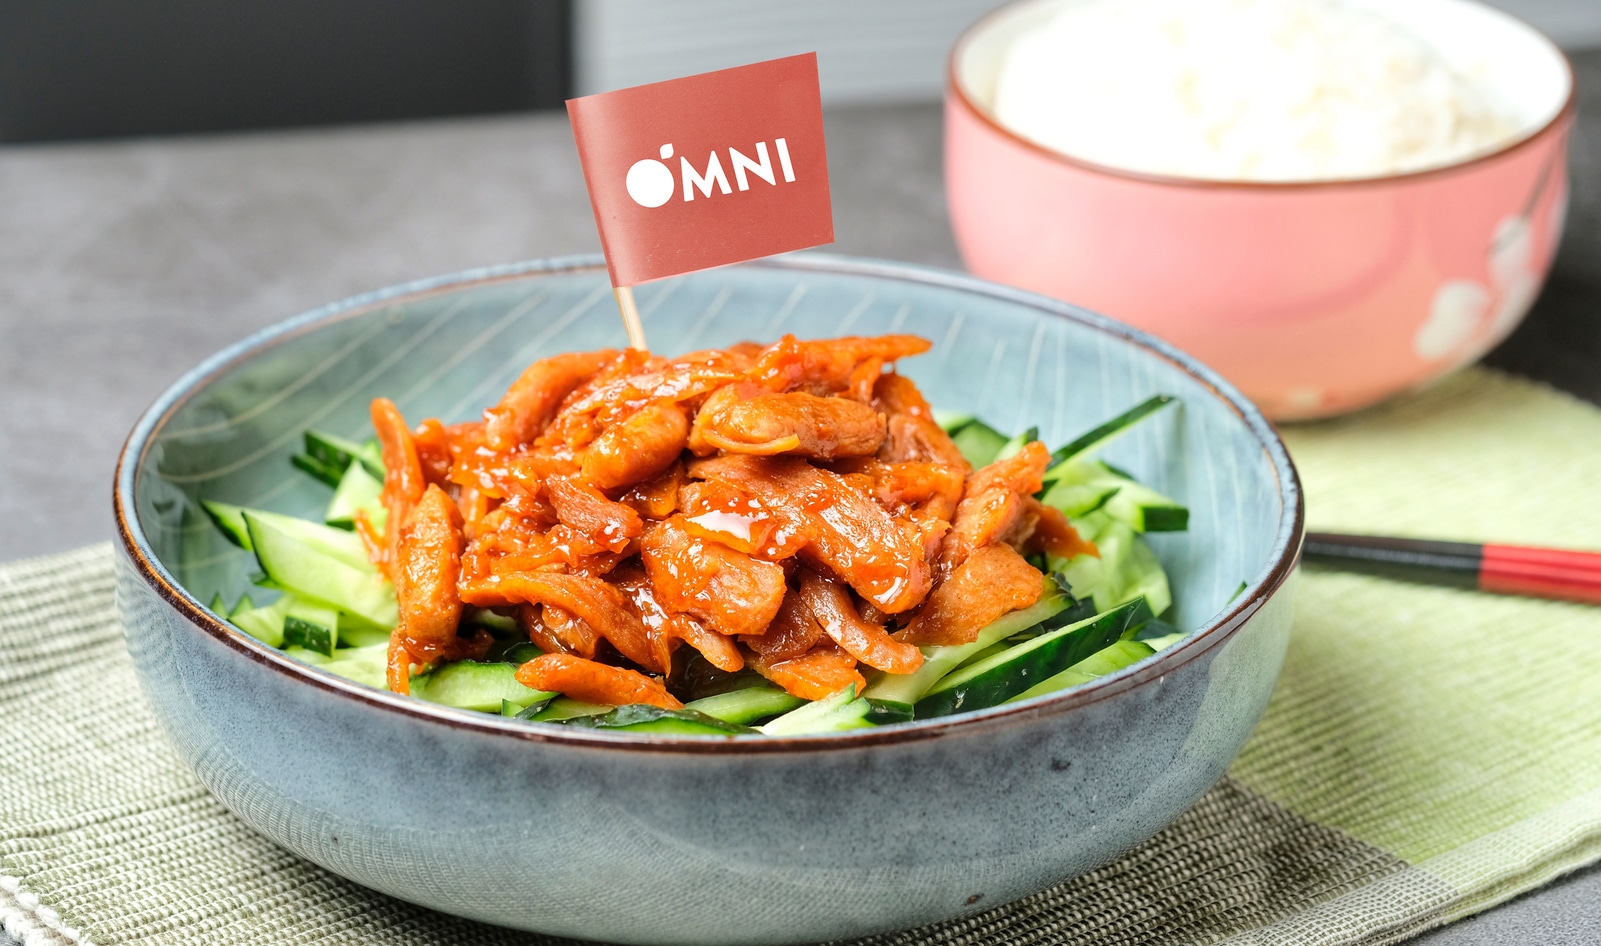 Asia’s Top Vegan Pork Brand Makes Its US Retail Debut at More than 500 Grocery Stores